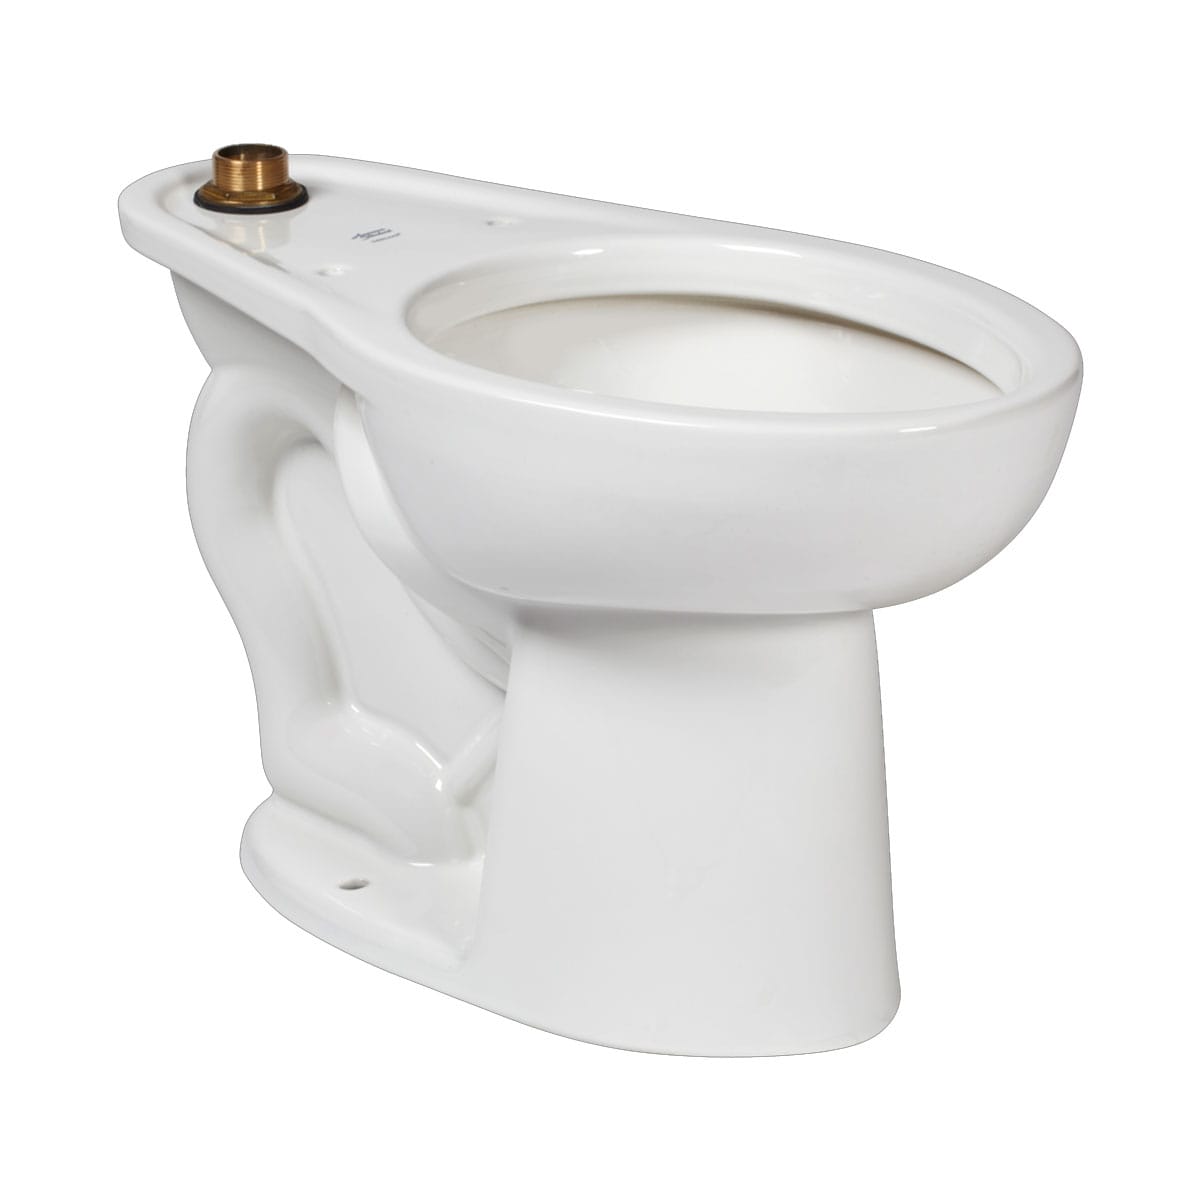 Top Spud American Standard 2234.001.020 Madera Universal Elongated Toilet Bowl without EverClean White